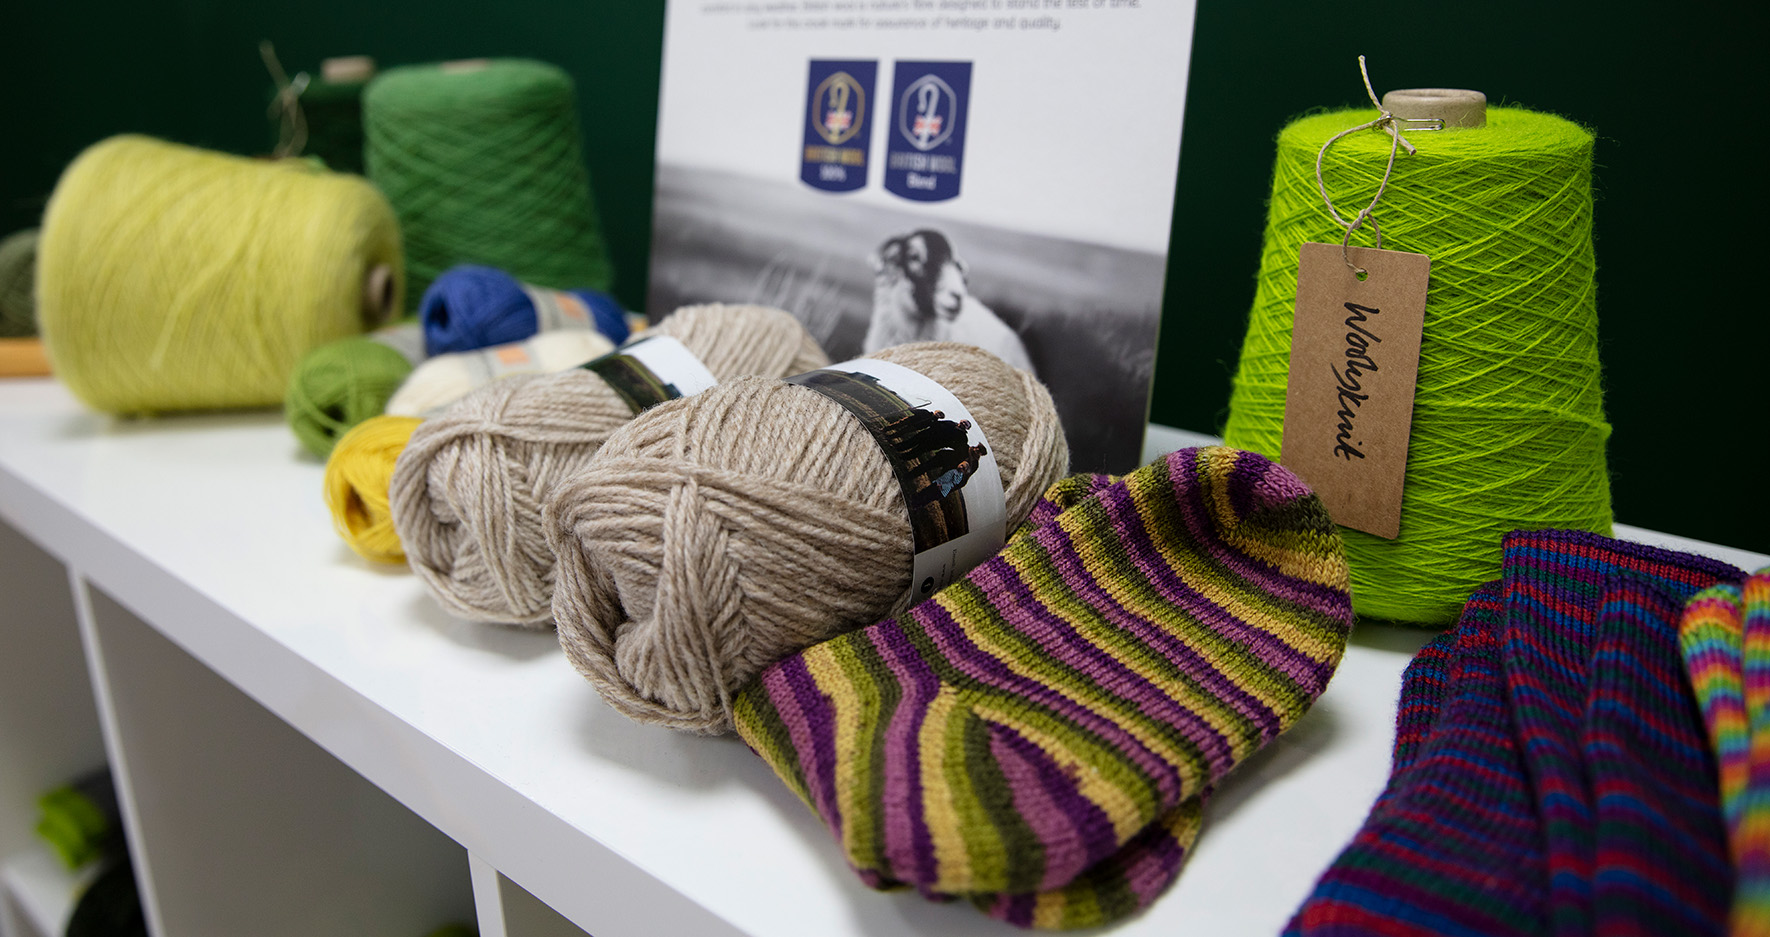 A range of wool produced by British Wool.